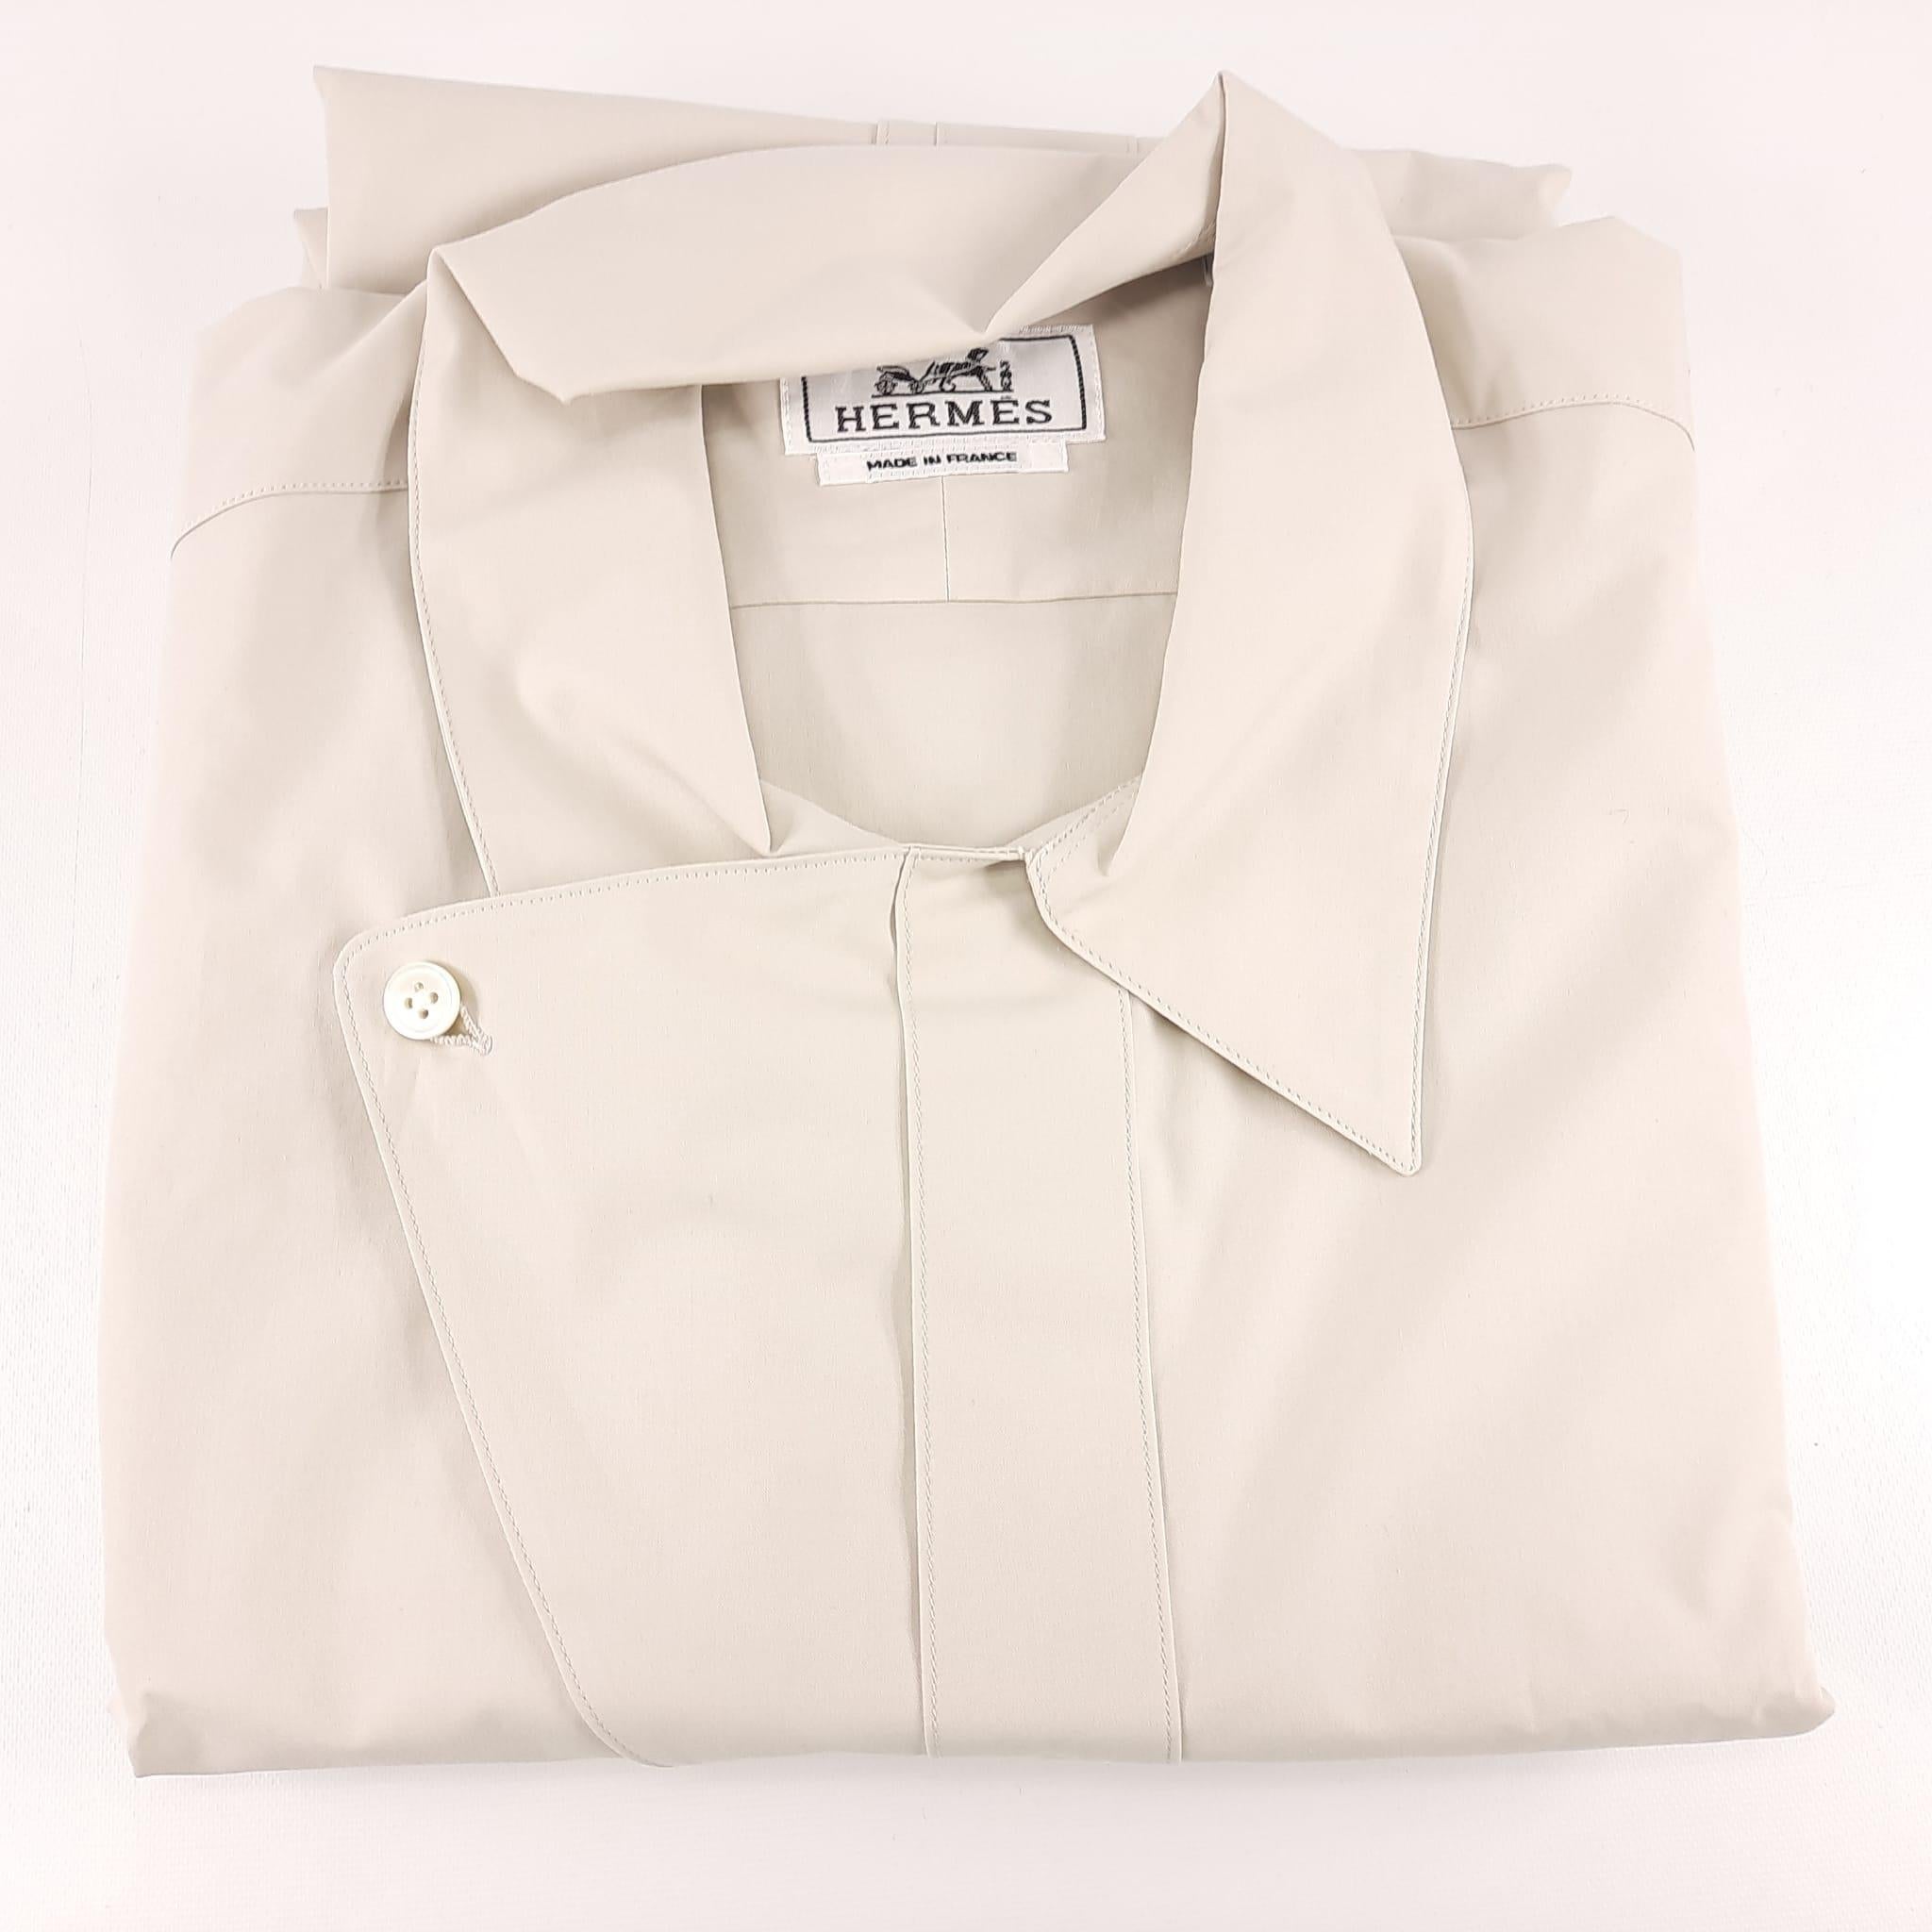 Size 39
Sporty fit shirt in compact cotton poplin
Polo neckline with band detail, to be worn open or closed
Pure mother-of-pearl buttons and plain cuffs with palladium-plated Clou de Selle buttons
Made in France
Length: 78 cm 